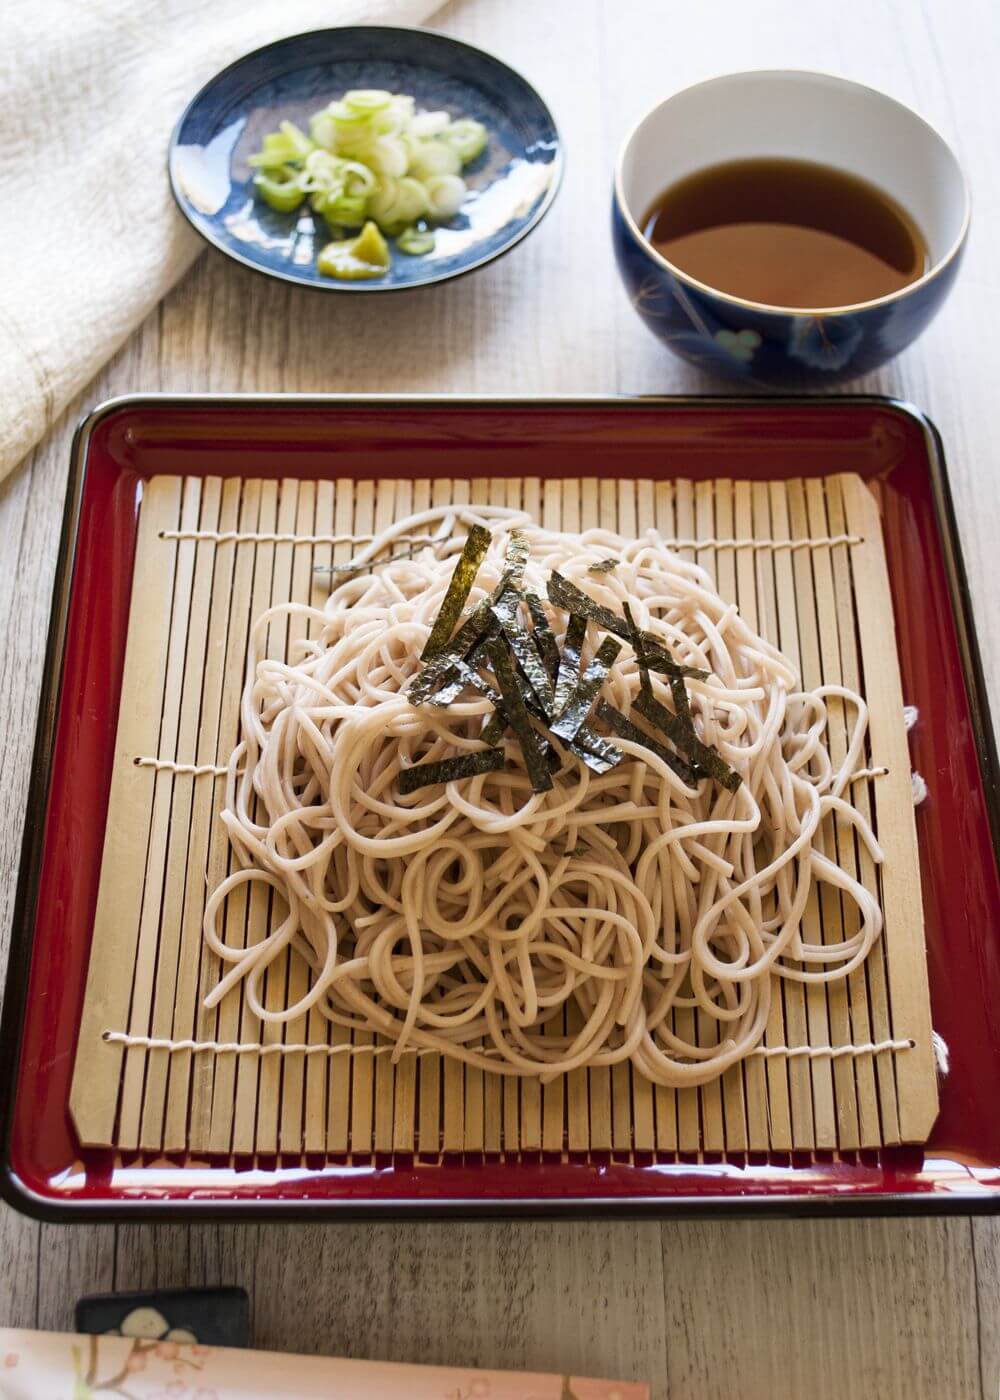 Zaru soba (cold soba noodles) is the best way to eat soba (buckwheat) noodles. Zaru soba is the simplest form of eating noodles and so fast to make. It is a popular summer dish in Japan of course but if you want to be like a connoisseur and enjoy the soba itself, then eat cold even in winter. Use konbu dashi to make it a perfect vegetarian dish.